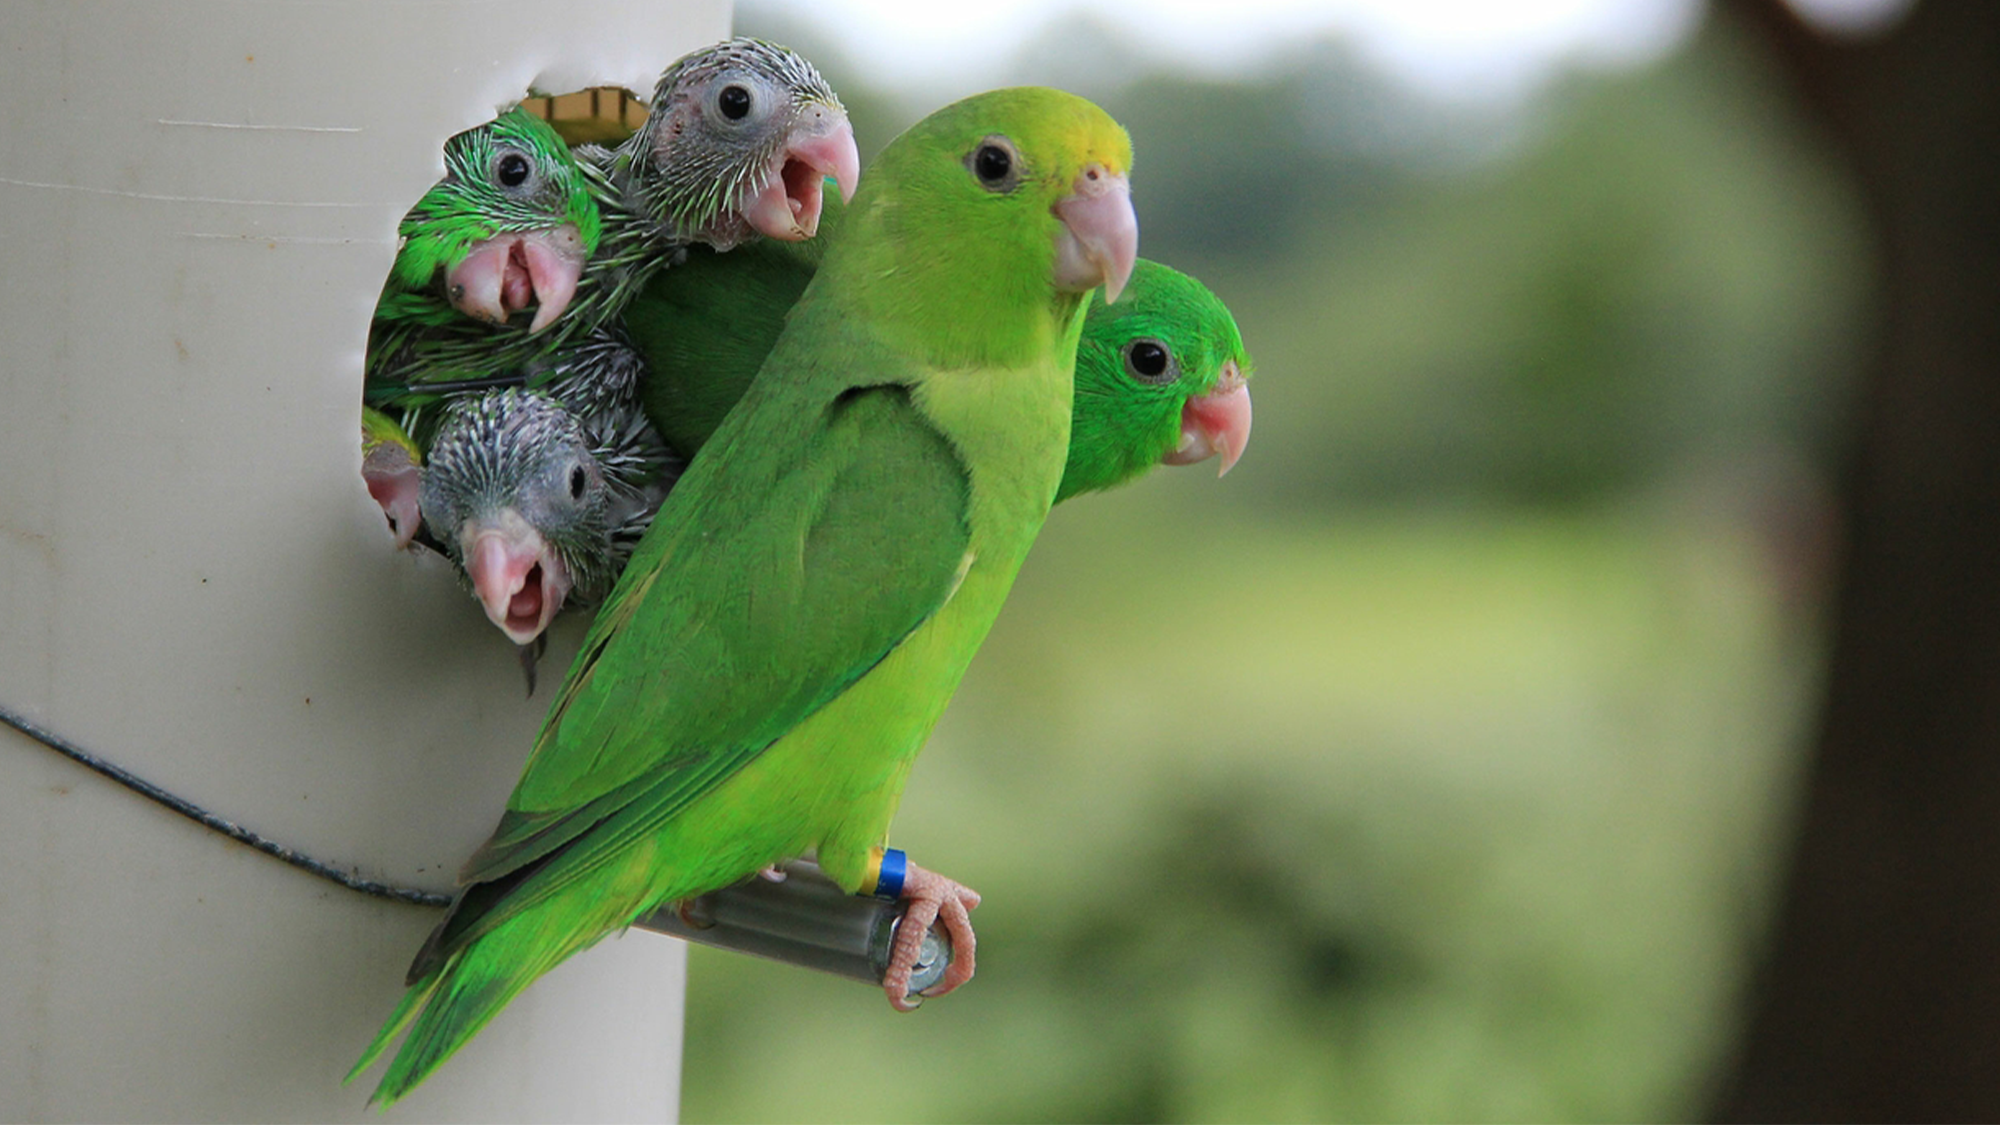 Why these parrots sometimes kill each other's chicks